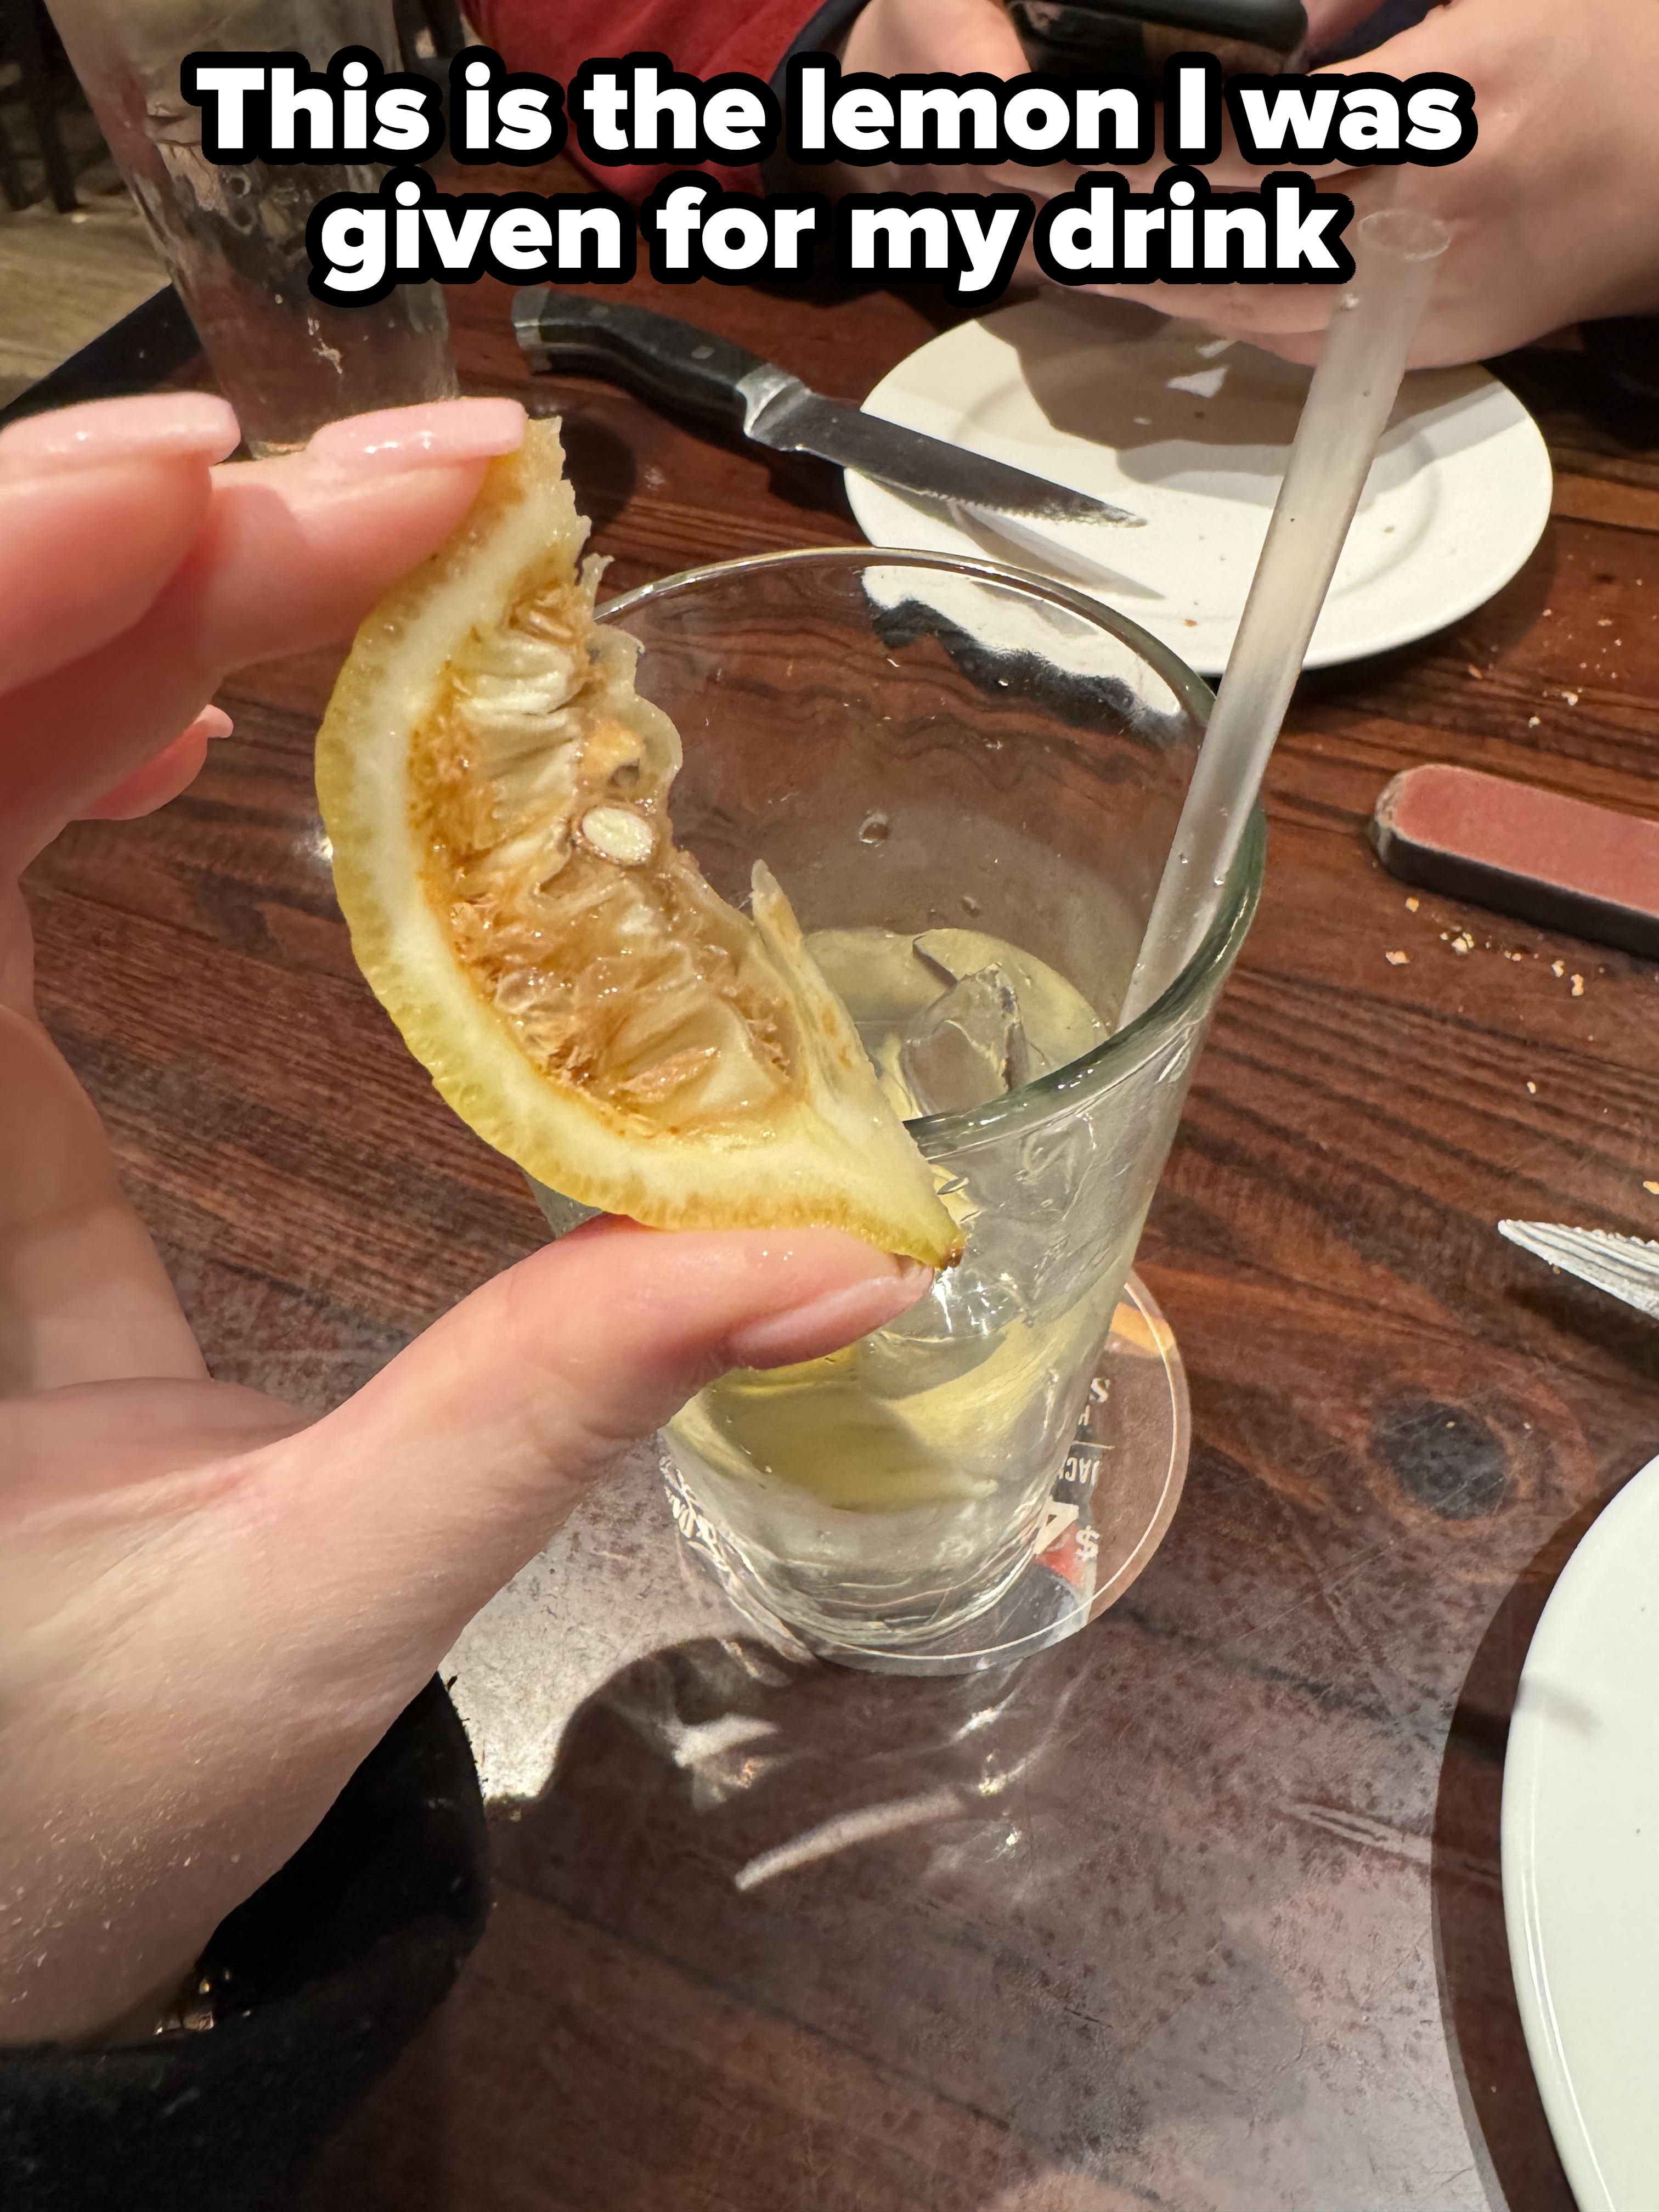 A person holds a desiccated, old lemon slice with caption &quot;This is the lemon I was given for my drink&quot;